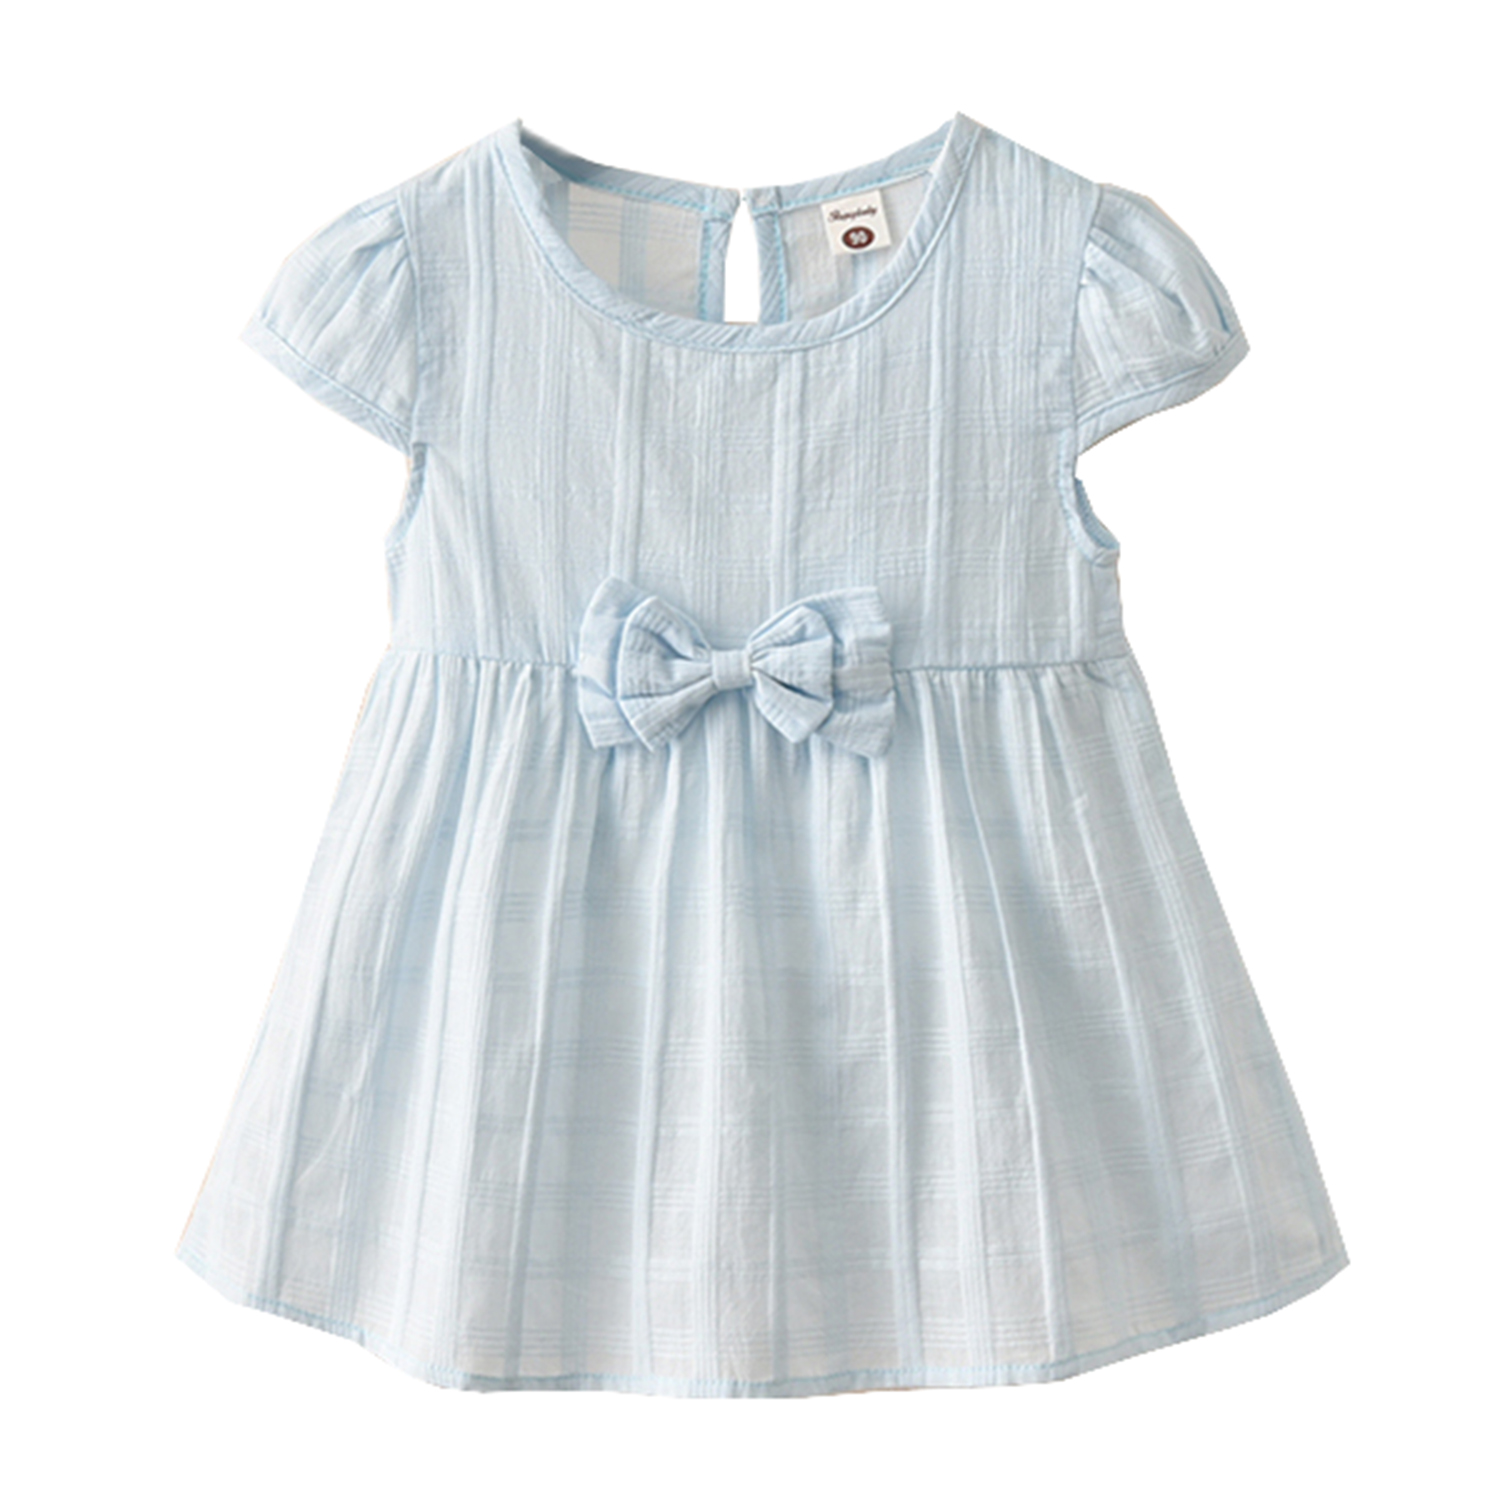 Styles I Love Baby Toddler Girl Solid Color Cap-Sleeve Bowknot Cotton Dress Spring Summer Clothes 3 Colors (Blue, 120/3-4 Years) - image 1 of 5